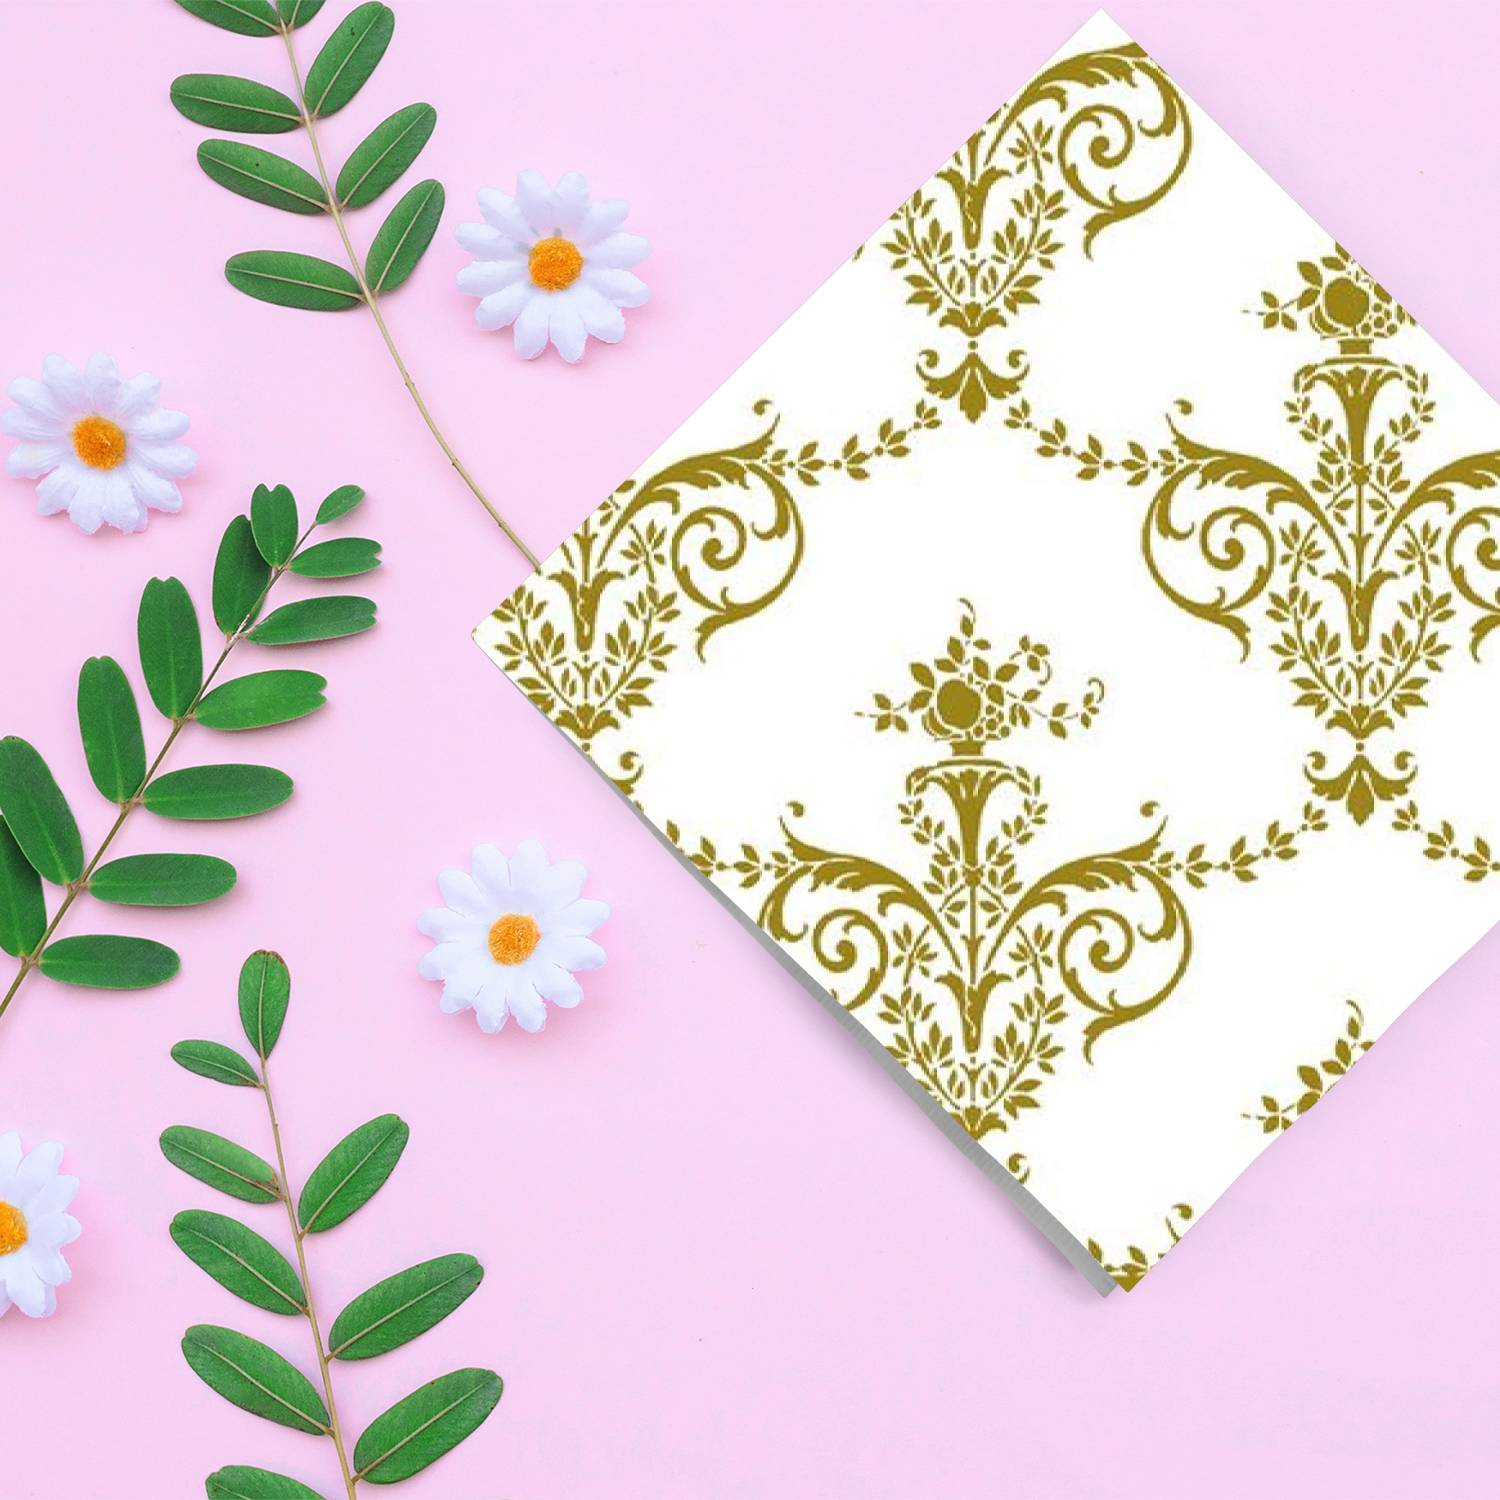 20 Pcs 13x13 in Metallic Gold and White Floral Paper Napkins